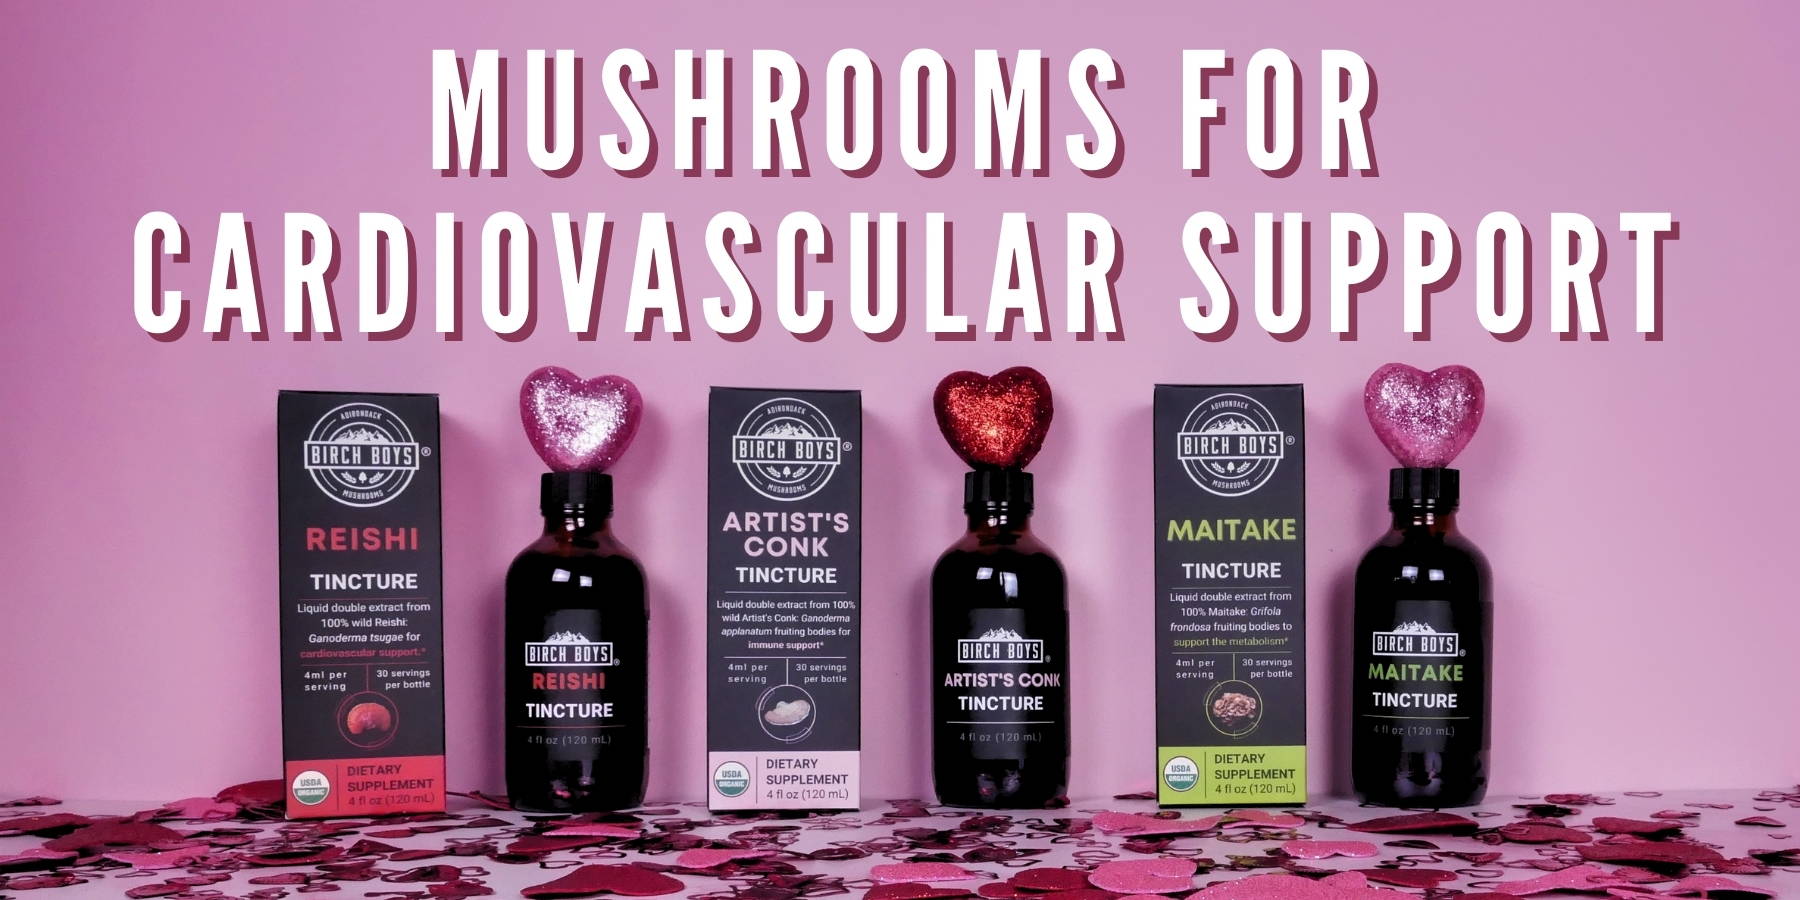 Mushrooms for cardiovascular support